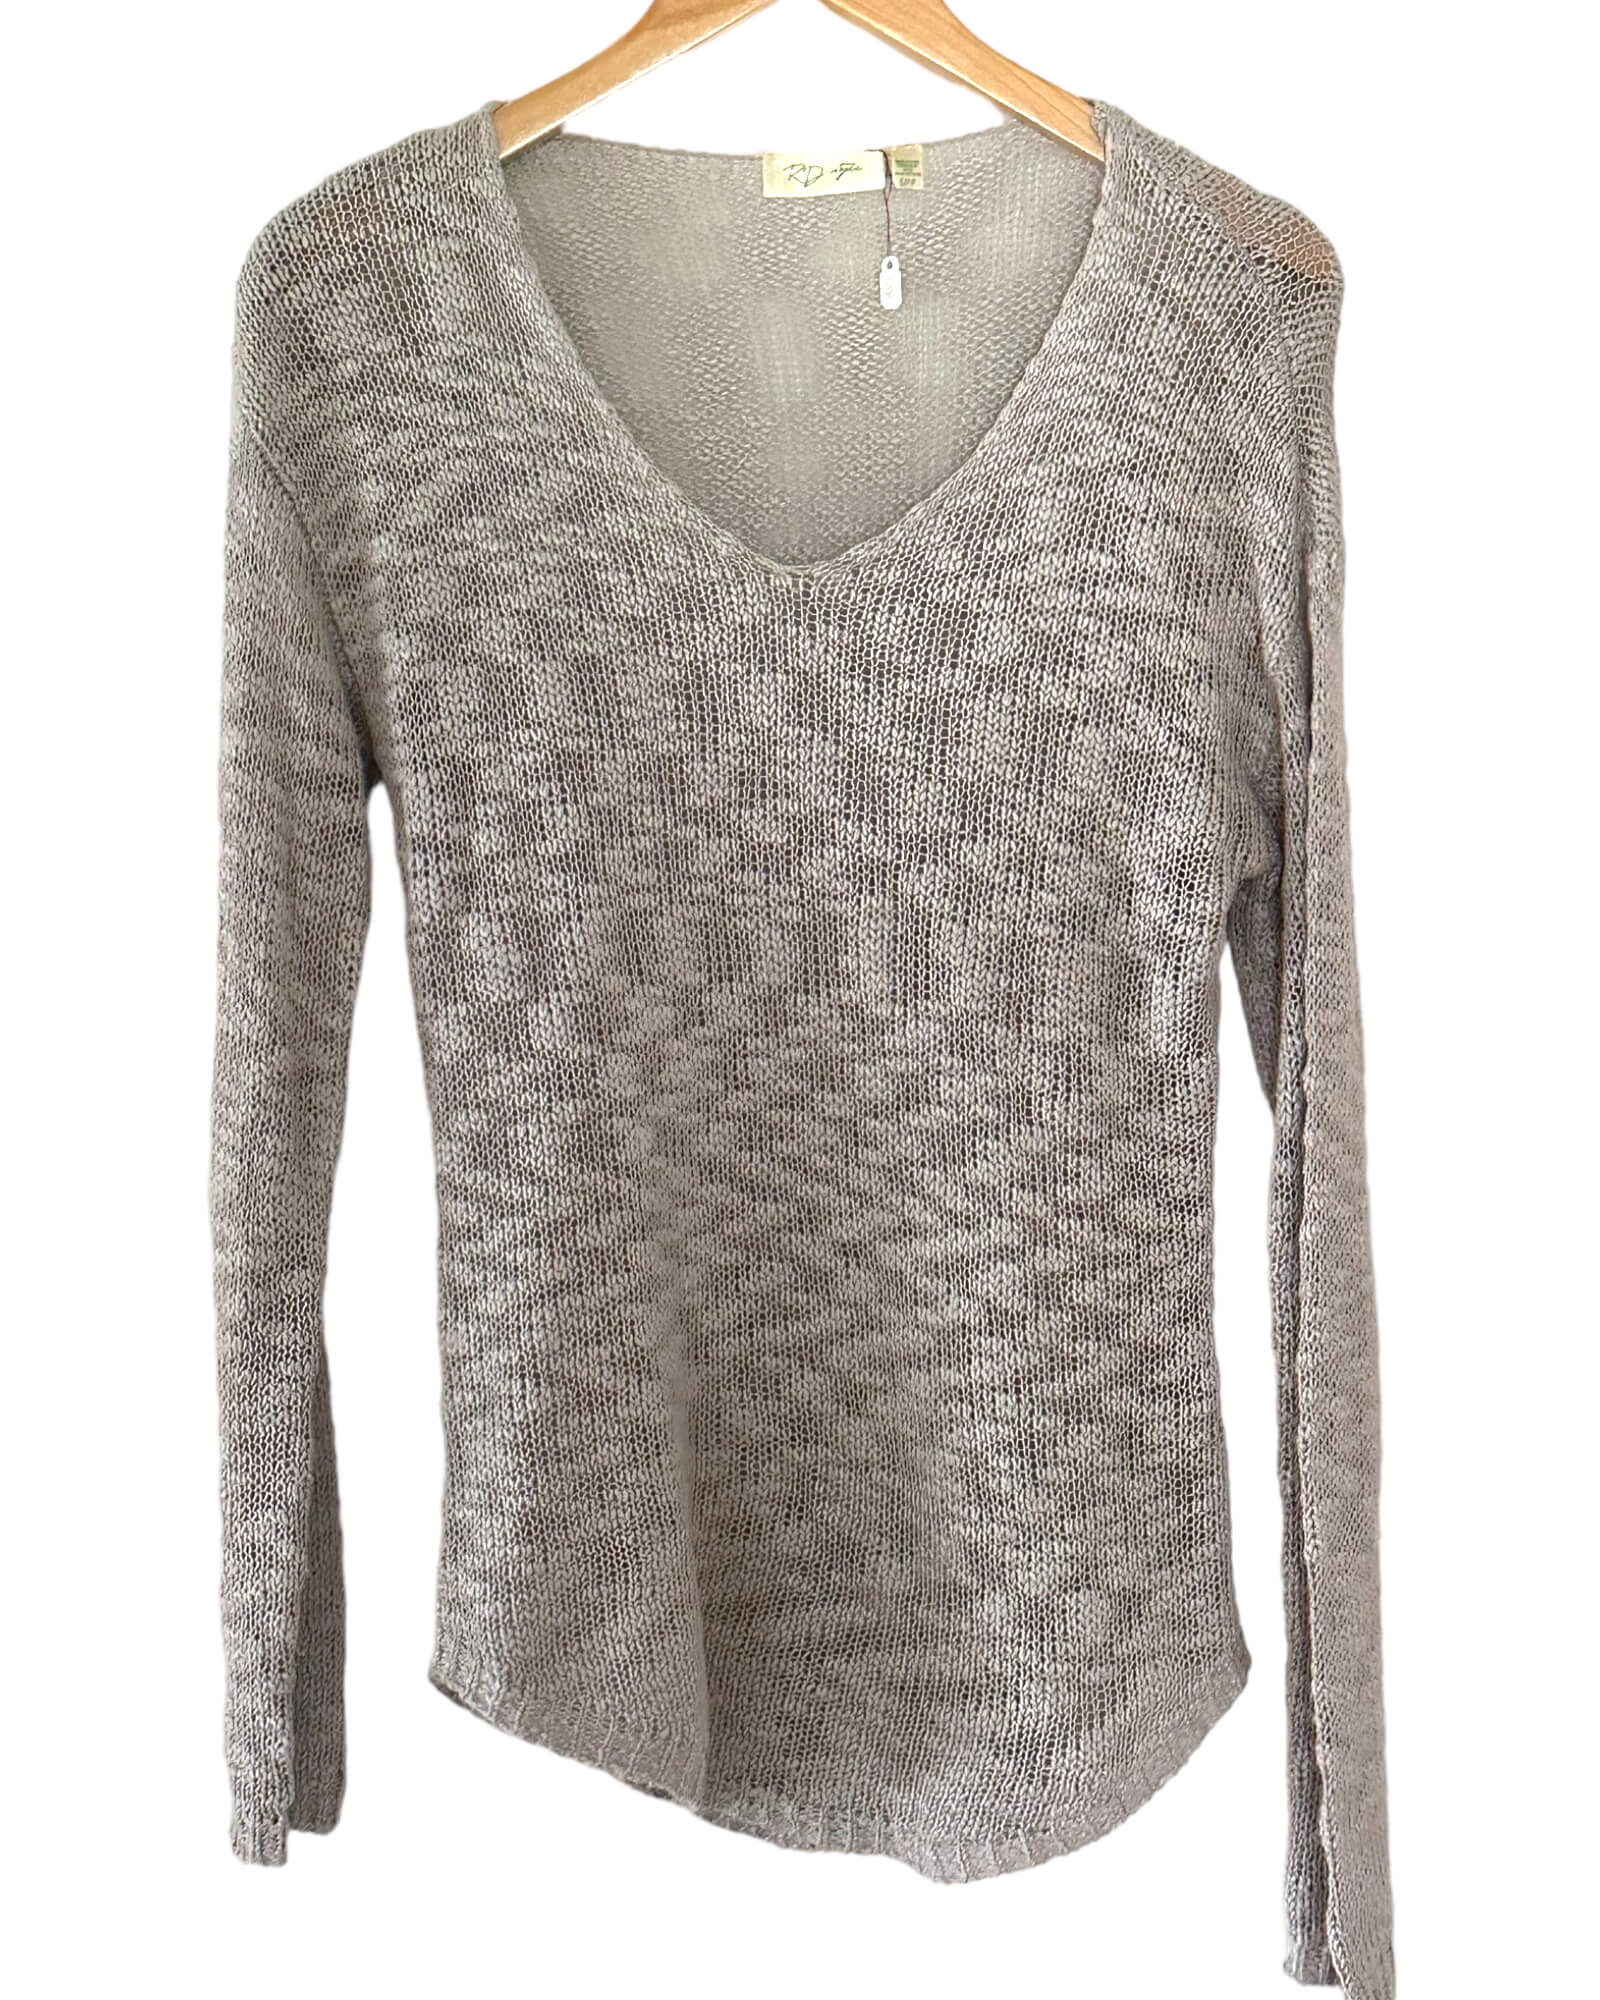 Cool Winter RD STYLE platinum gray open knit sweater